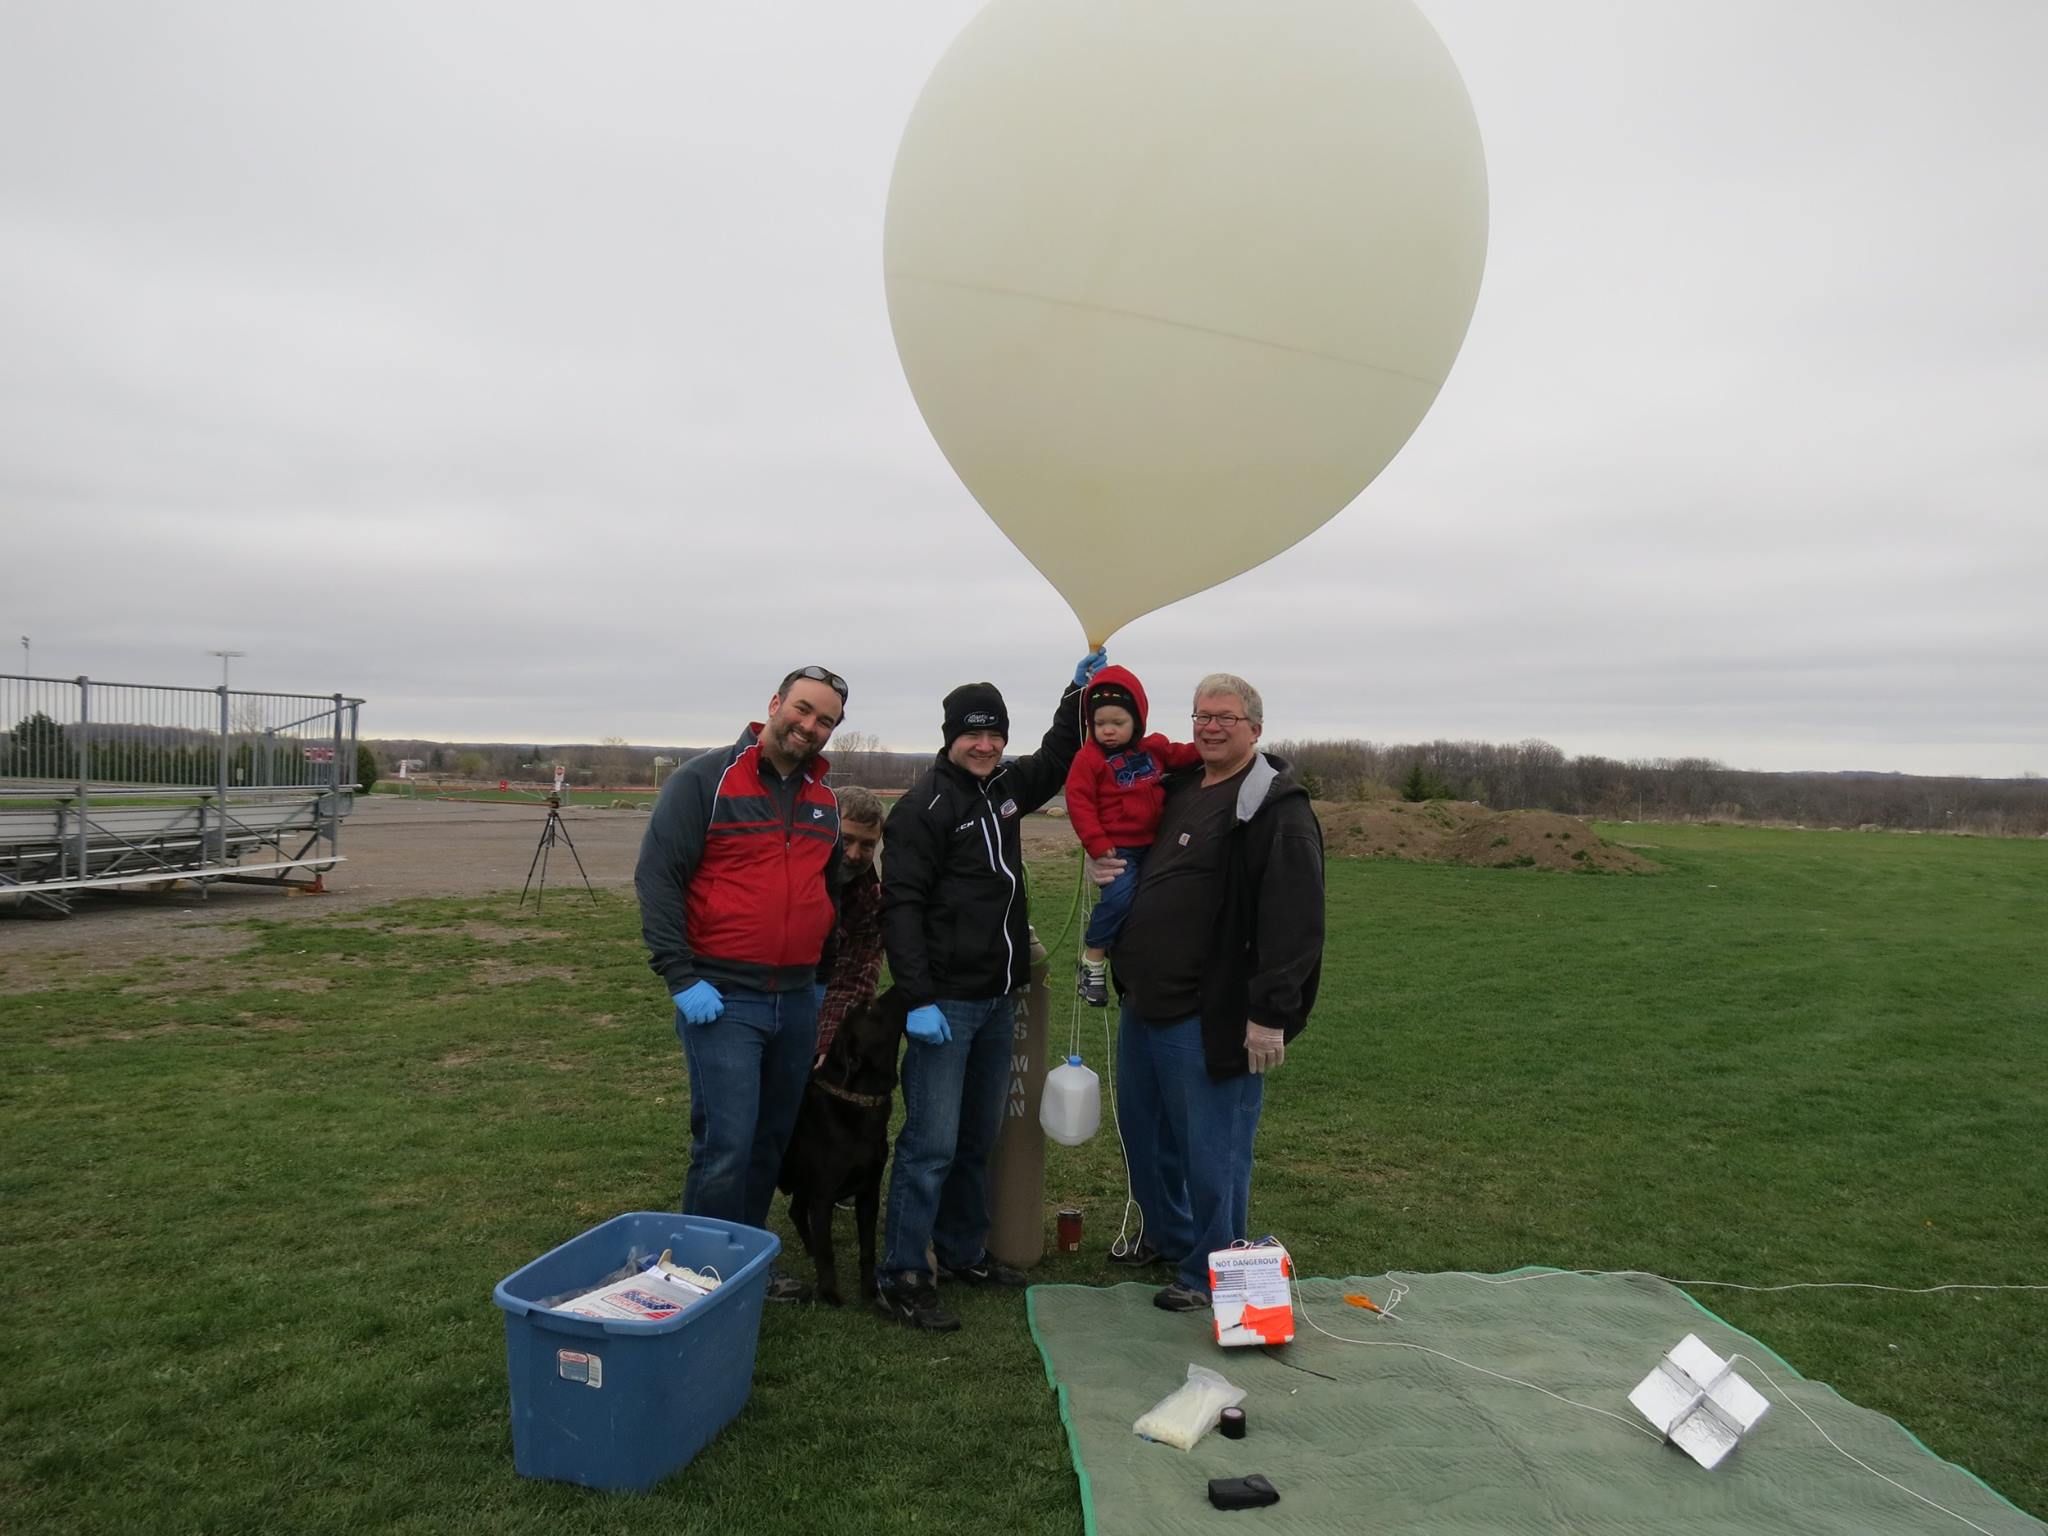 OLHZN-1 First High Altitude Weather Balloon Flight